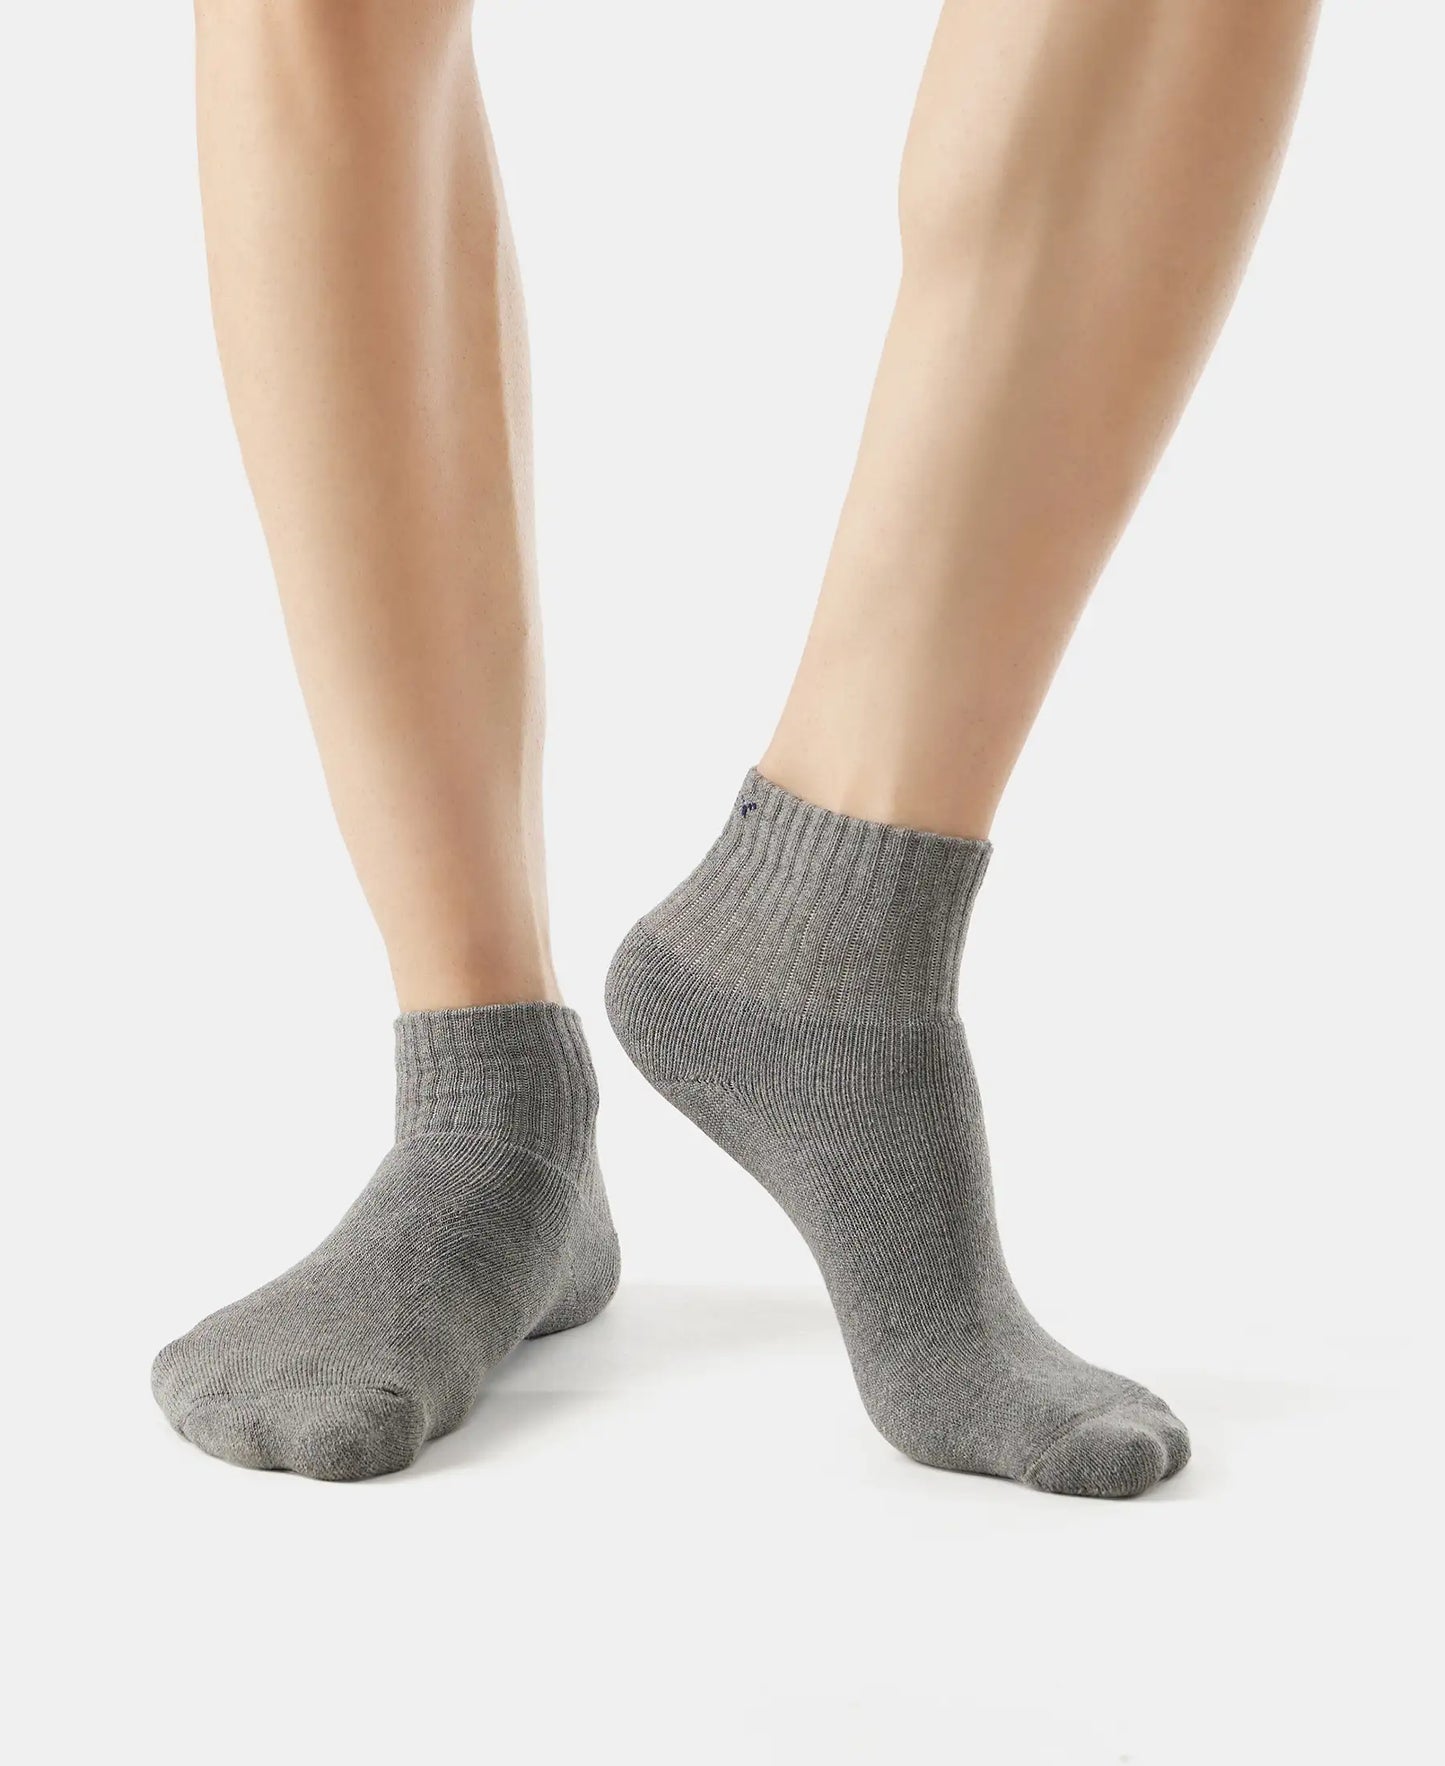 Compact Cotton Terry Ankle Length Socks With StayFresh Treatment - Black/Midgrey Melange/Charcoal Melange-2